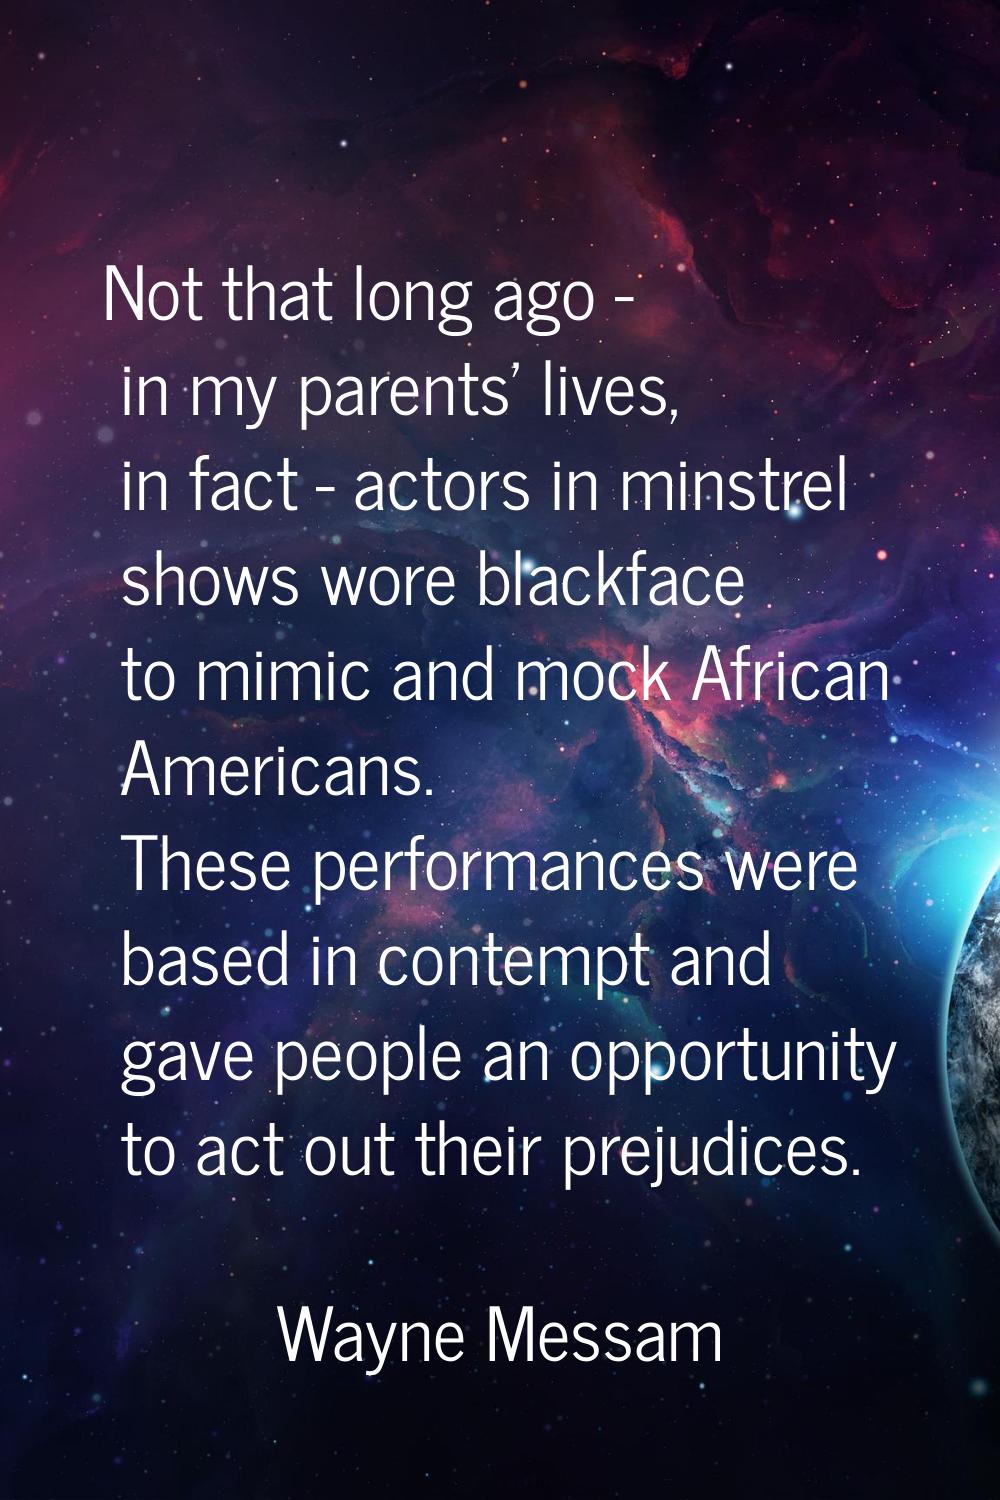 Not that long ago - in my parents' lives, in fact - actors in minstrel shows wore blackface to mimi